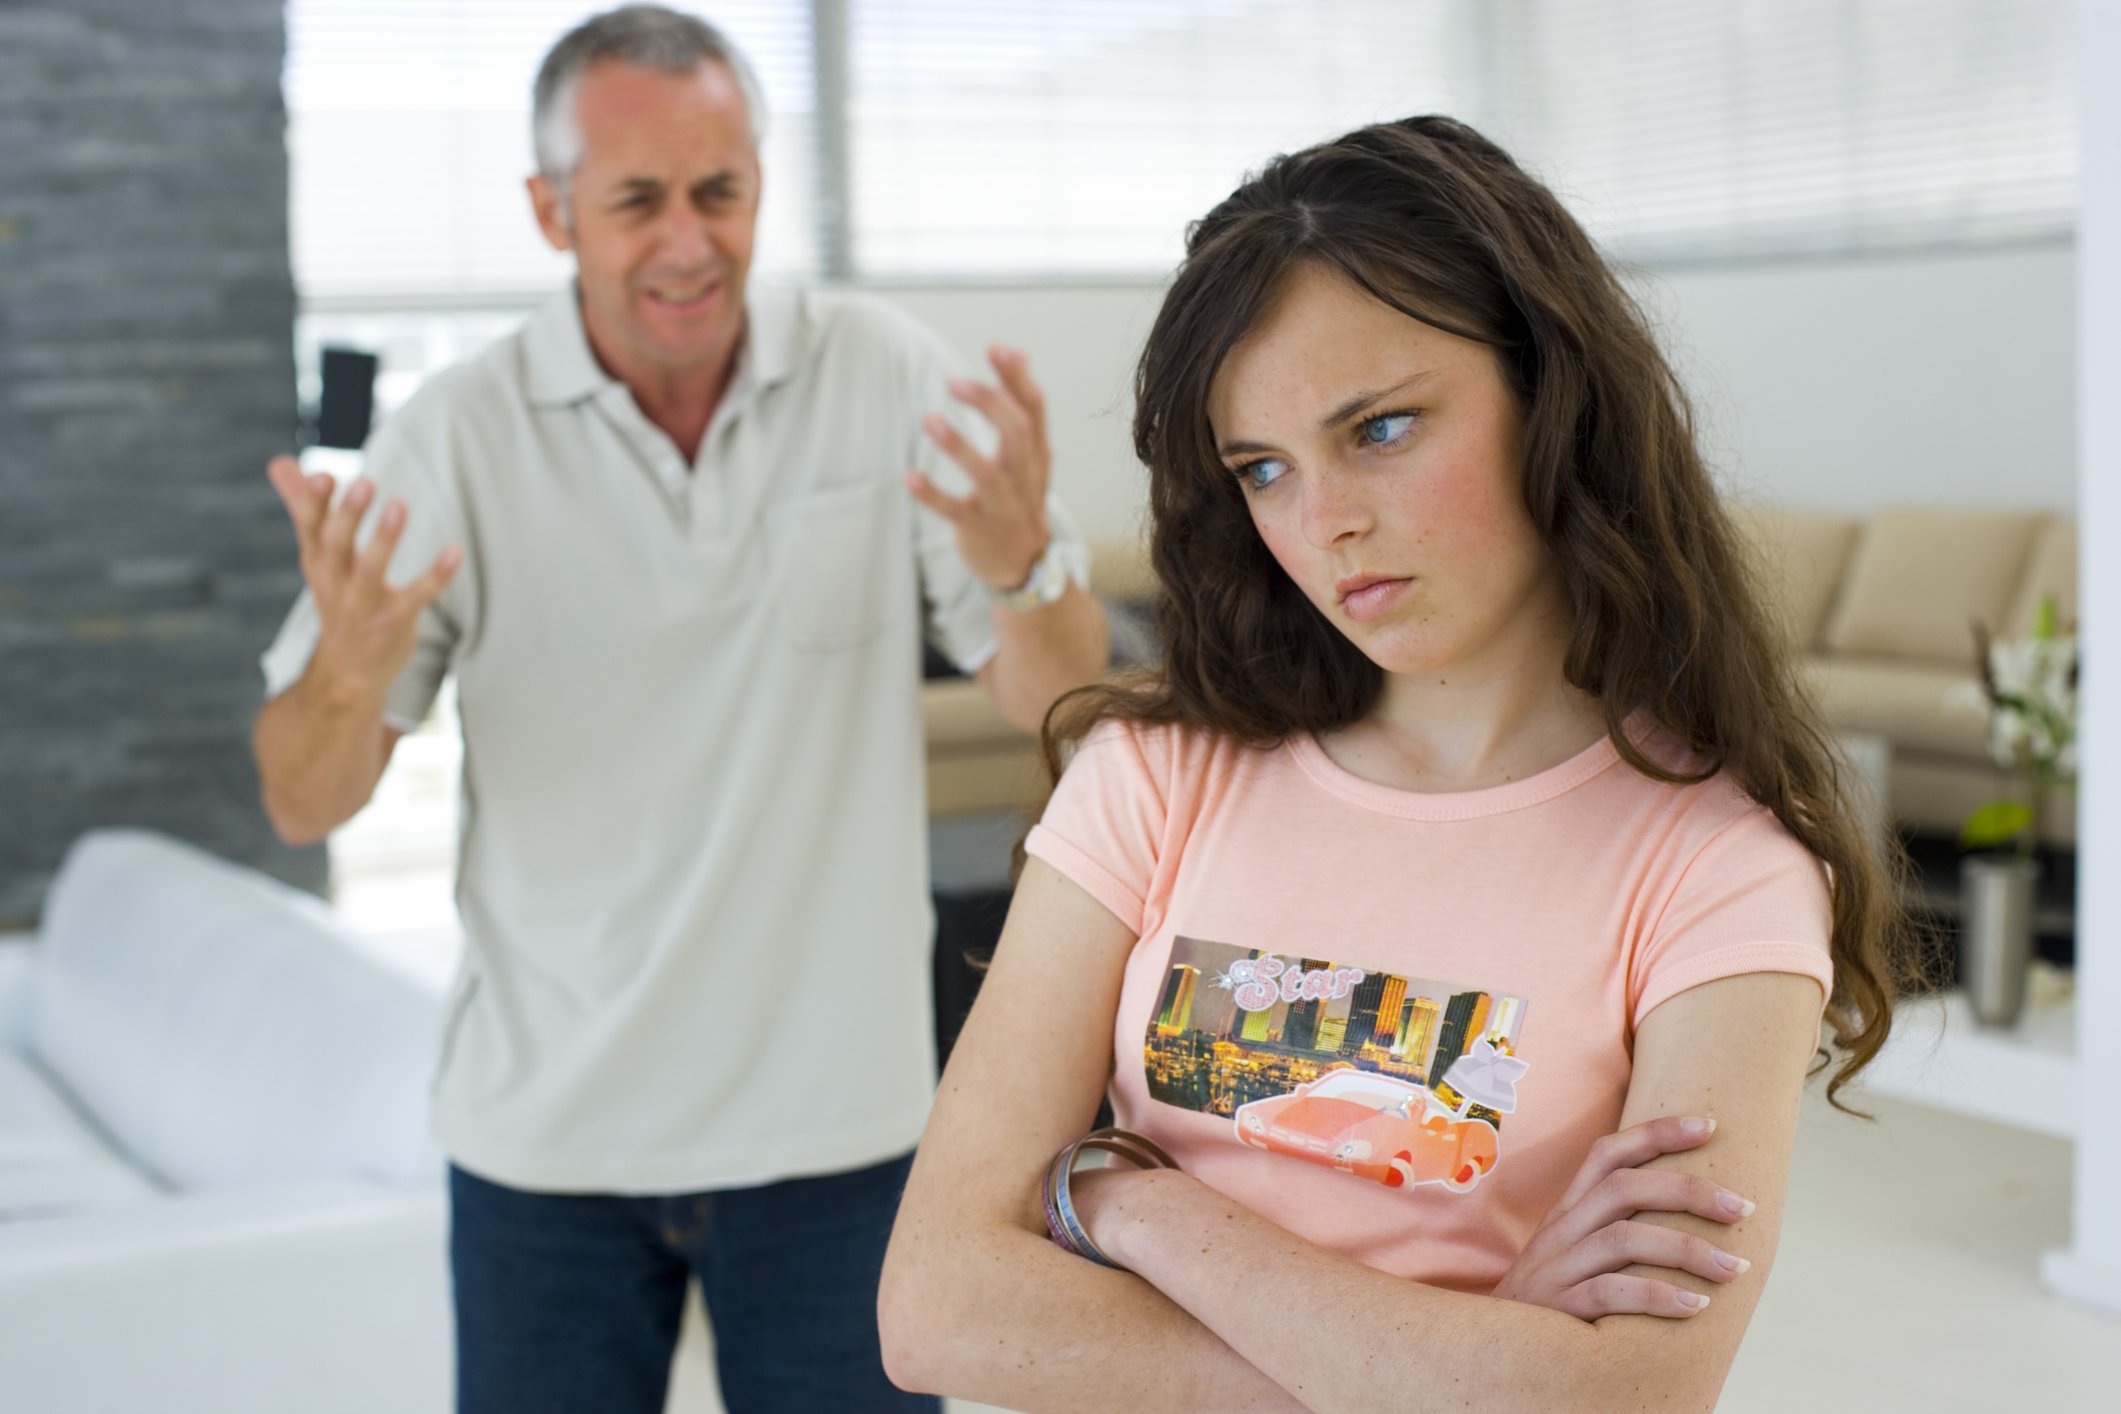 Father and daughter in a heated argument | Photo: Getty Images